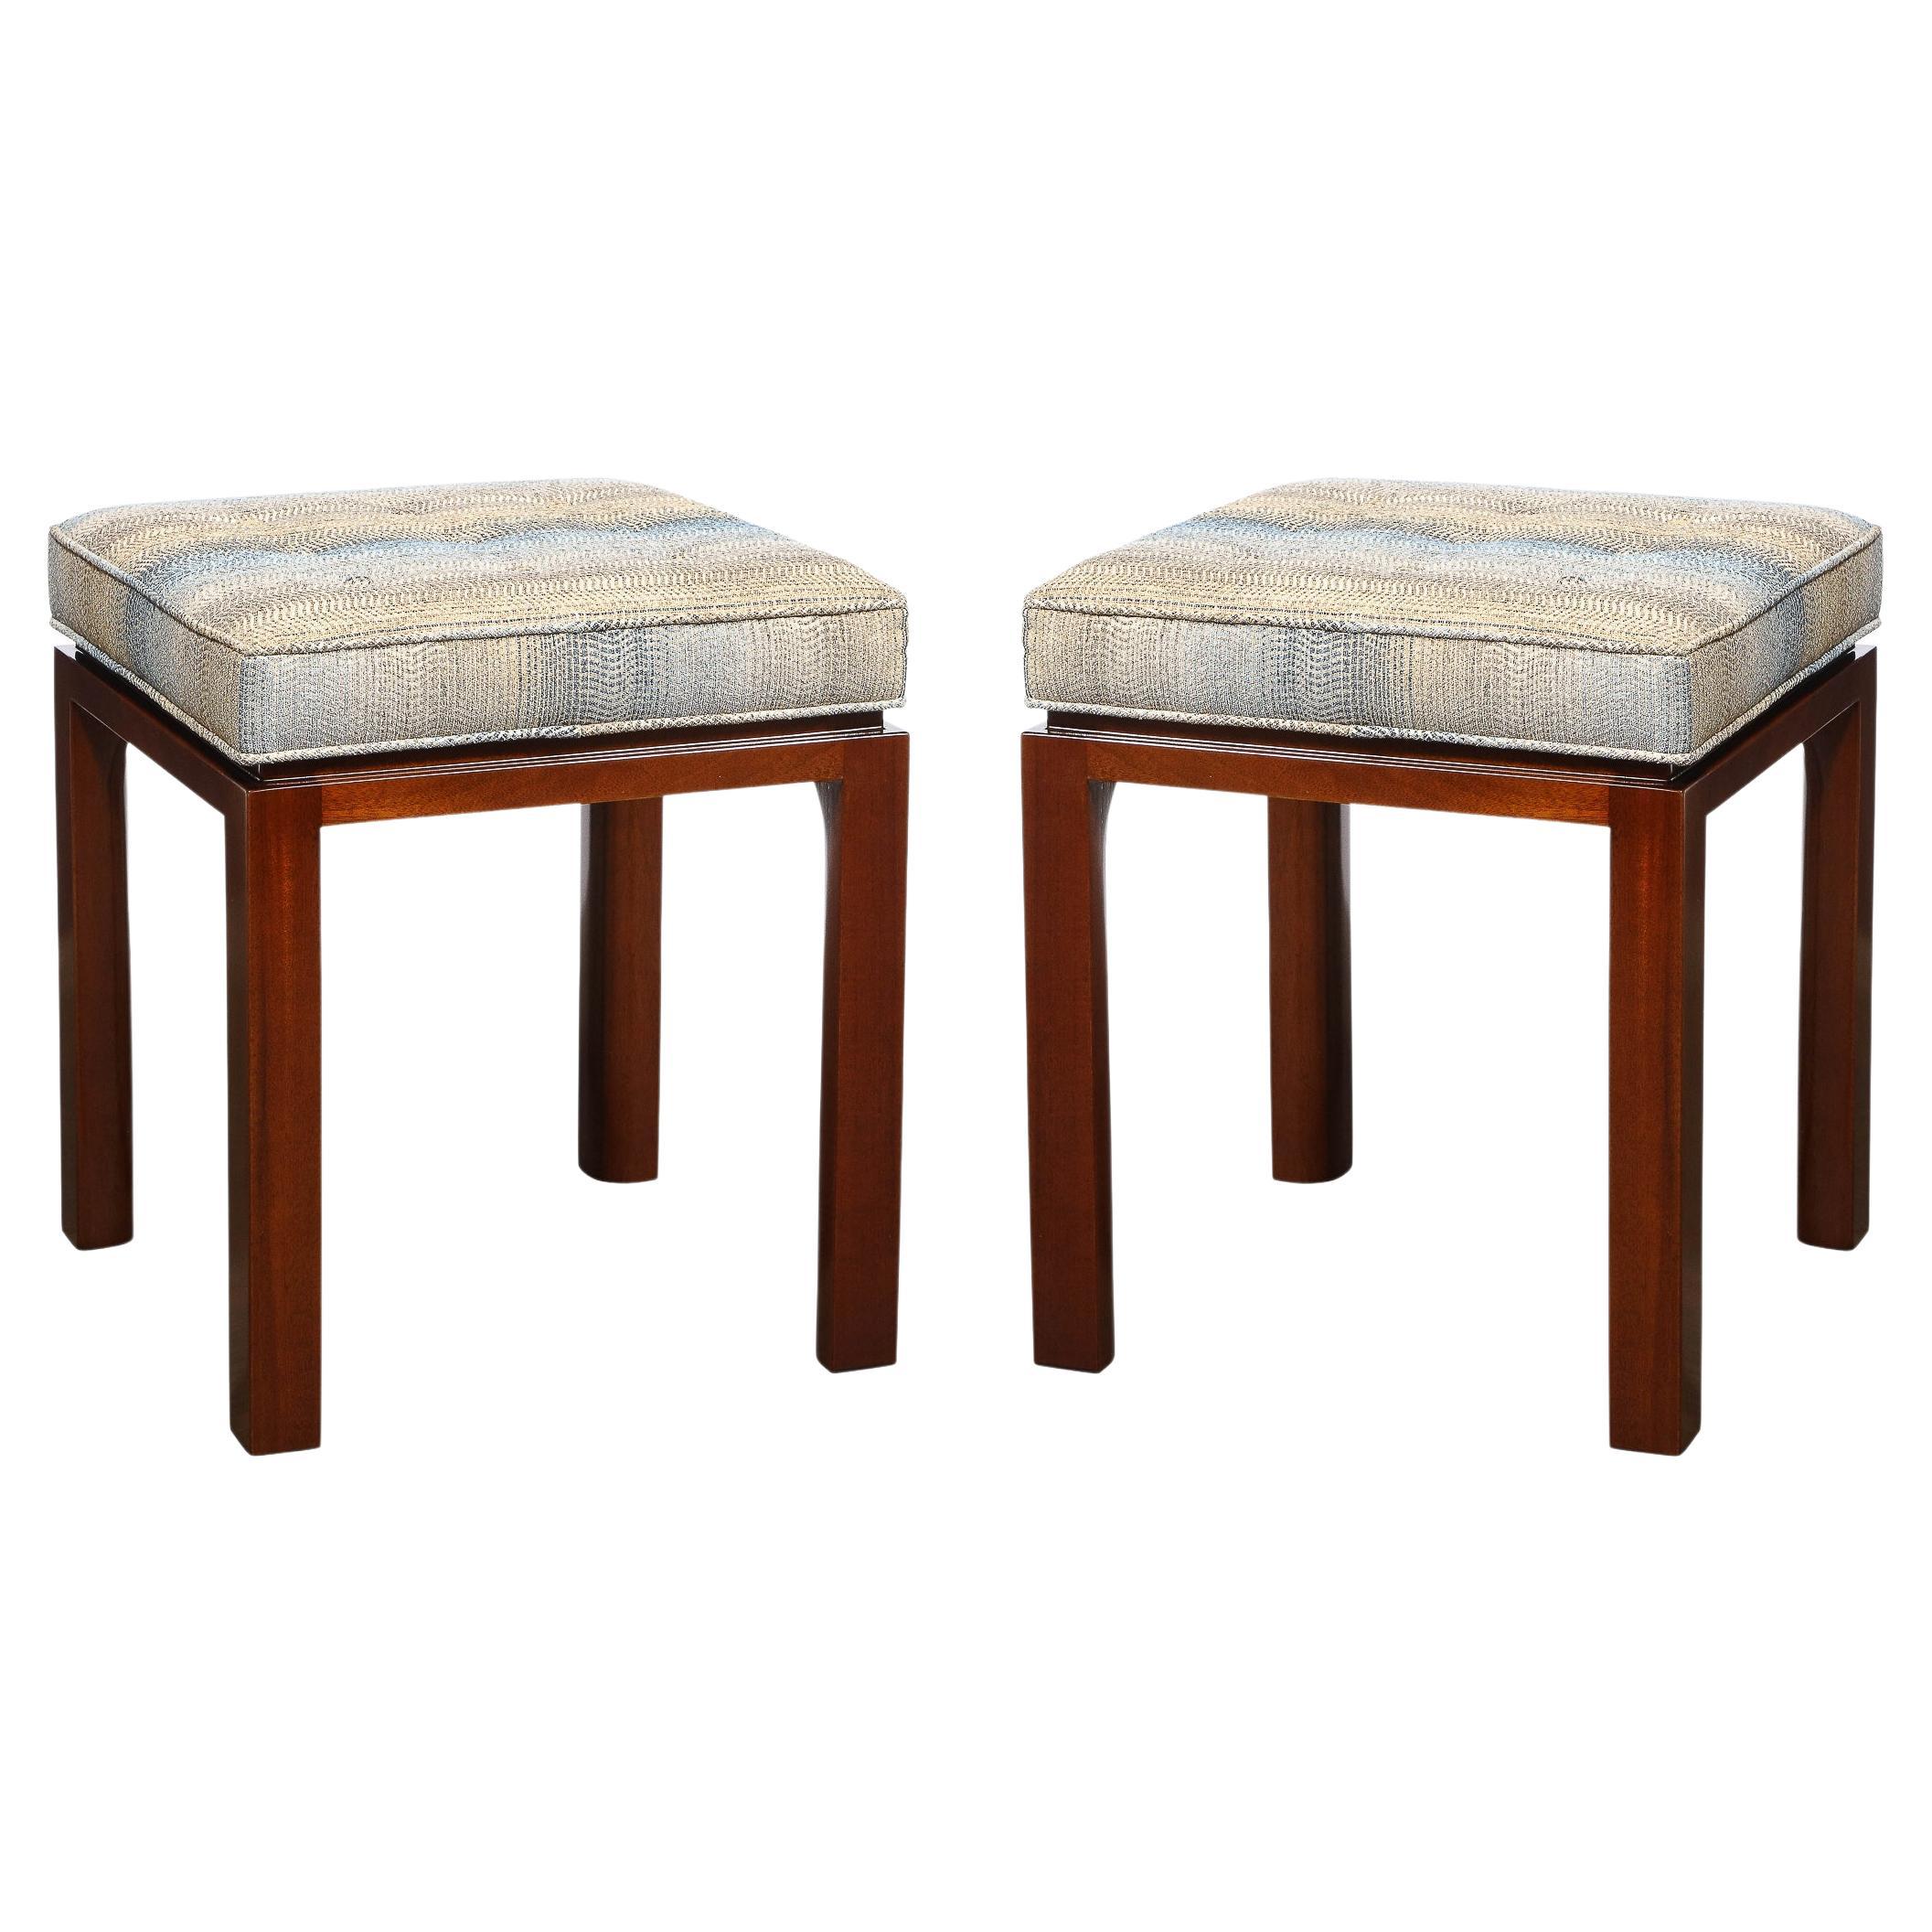 Pair of Mid-Century Modernist Stools with Button Detailing by Harvey Probber For Sale